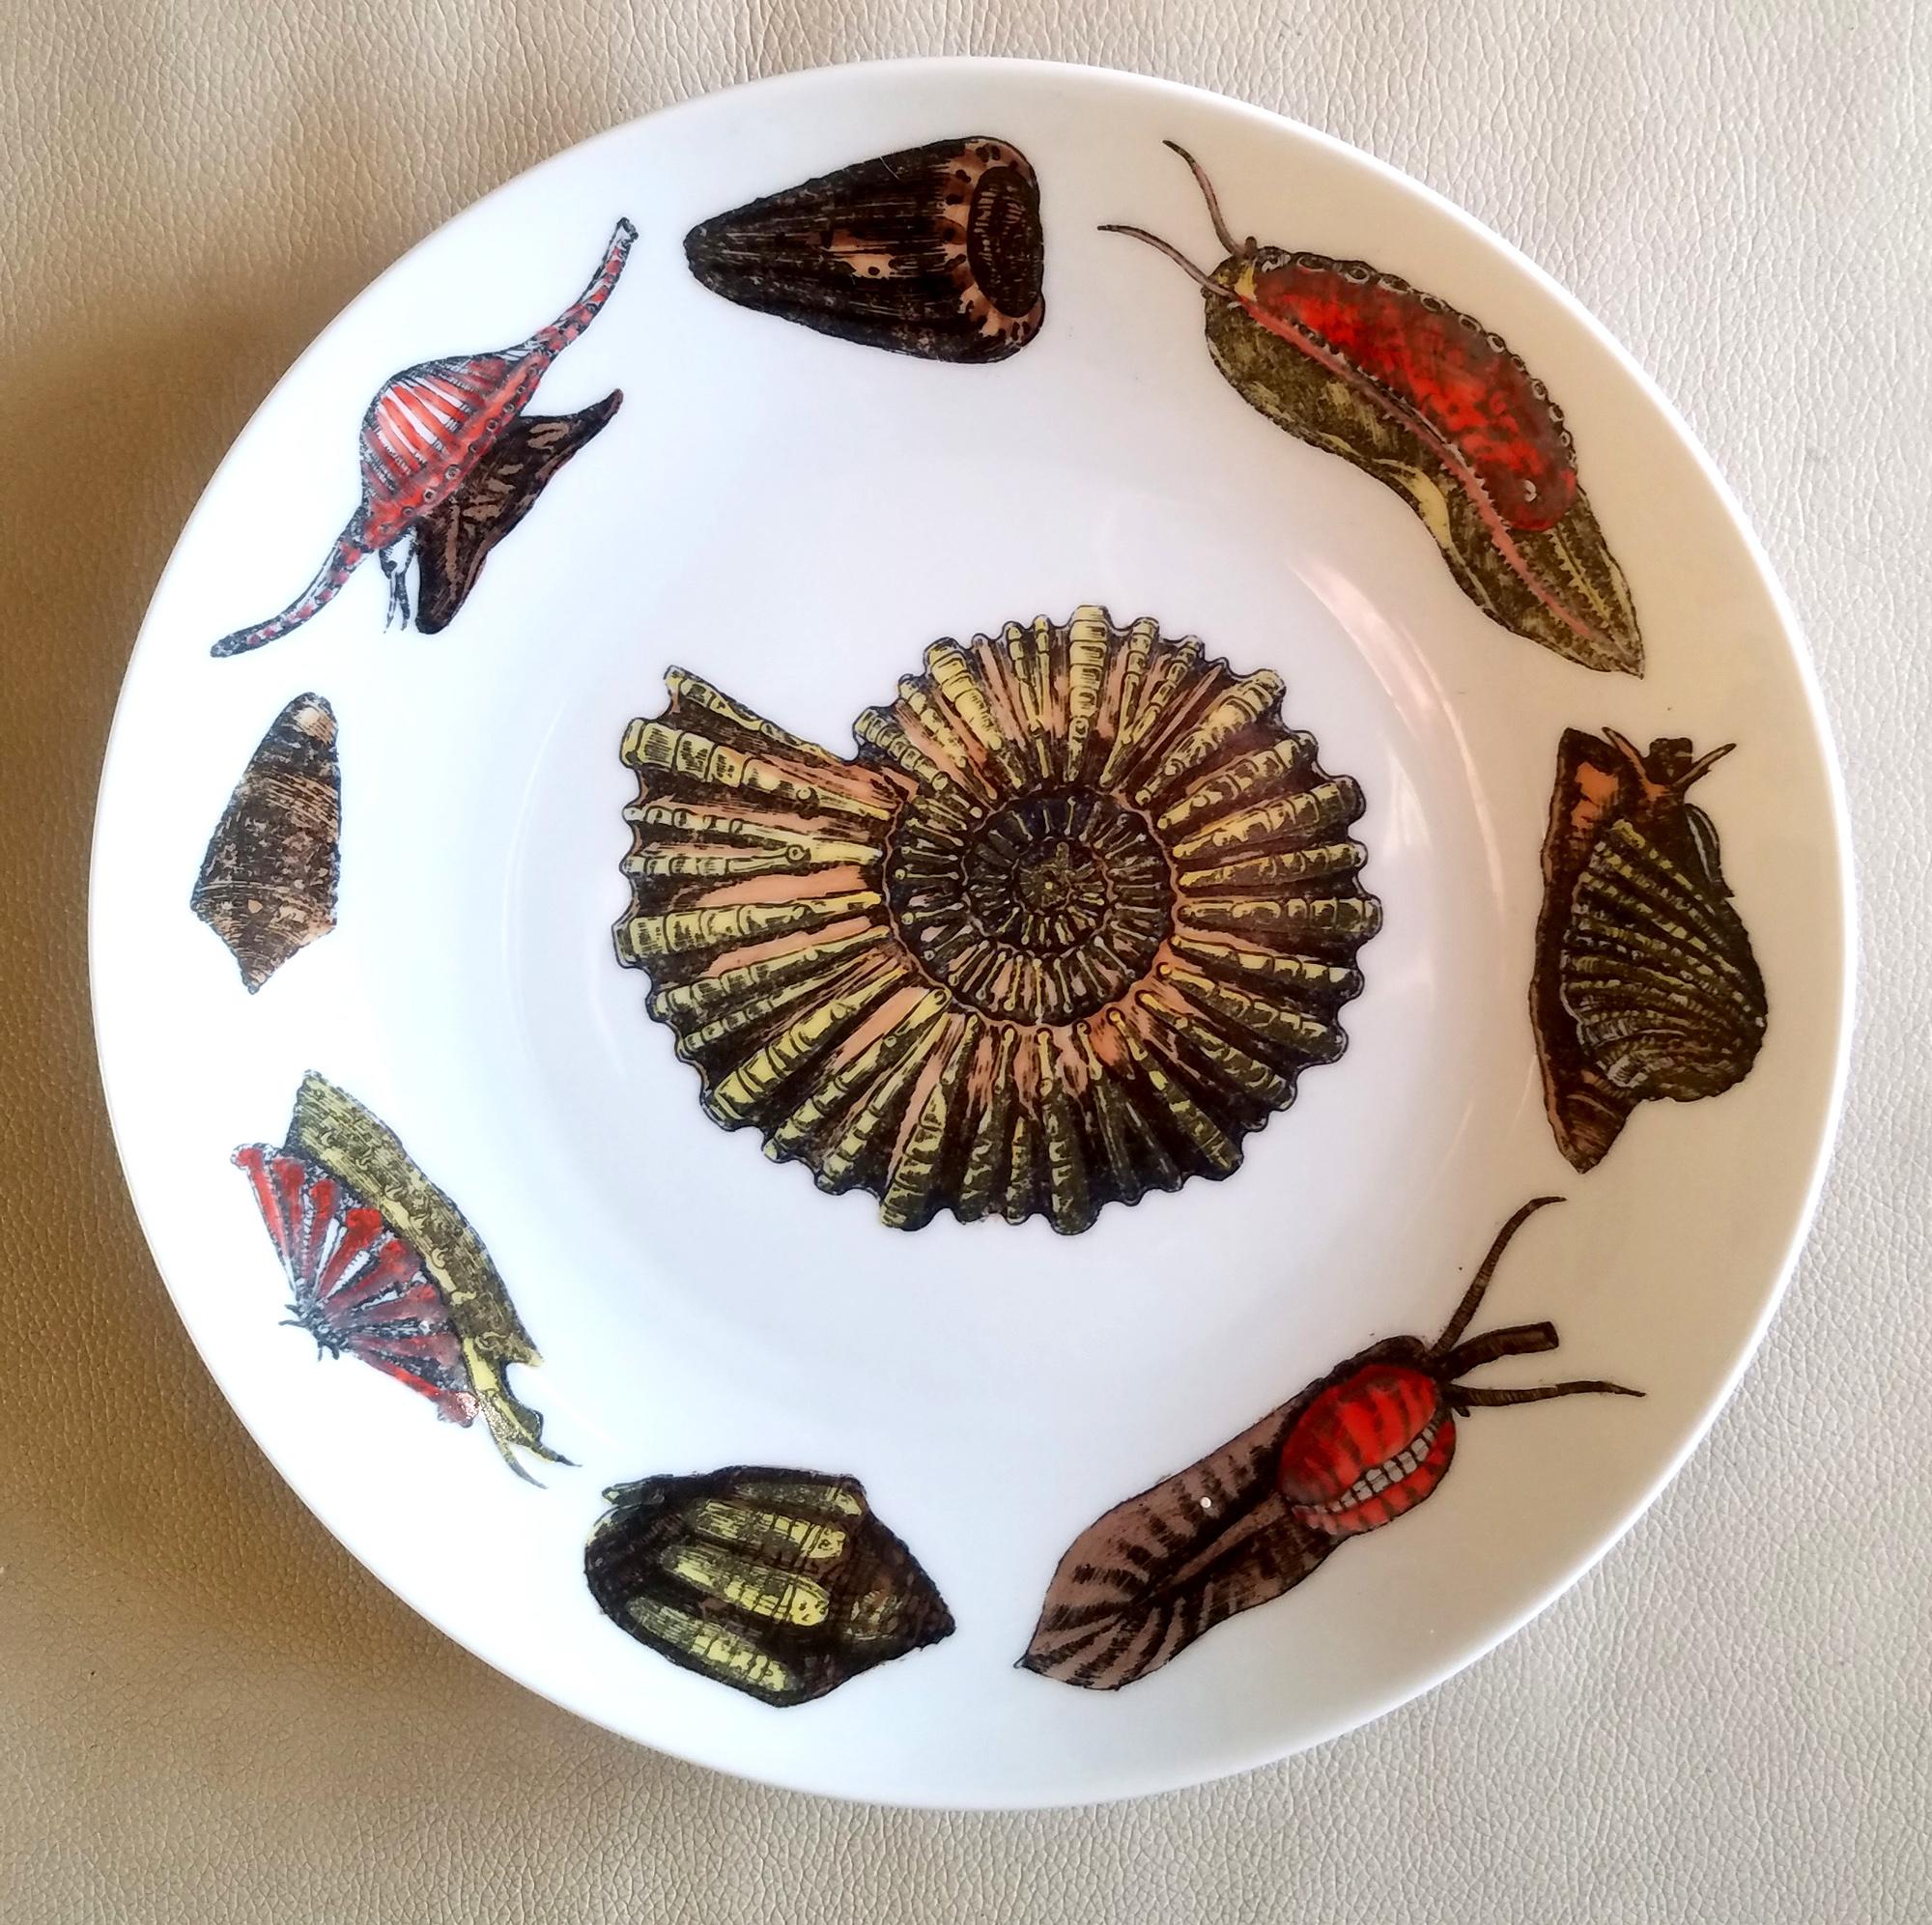 Piero Fornasetti Porcelain Conchiglie Seashell Set of Plates with Mollusks For Sale 5